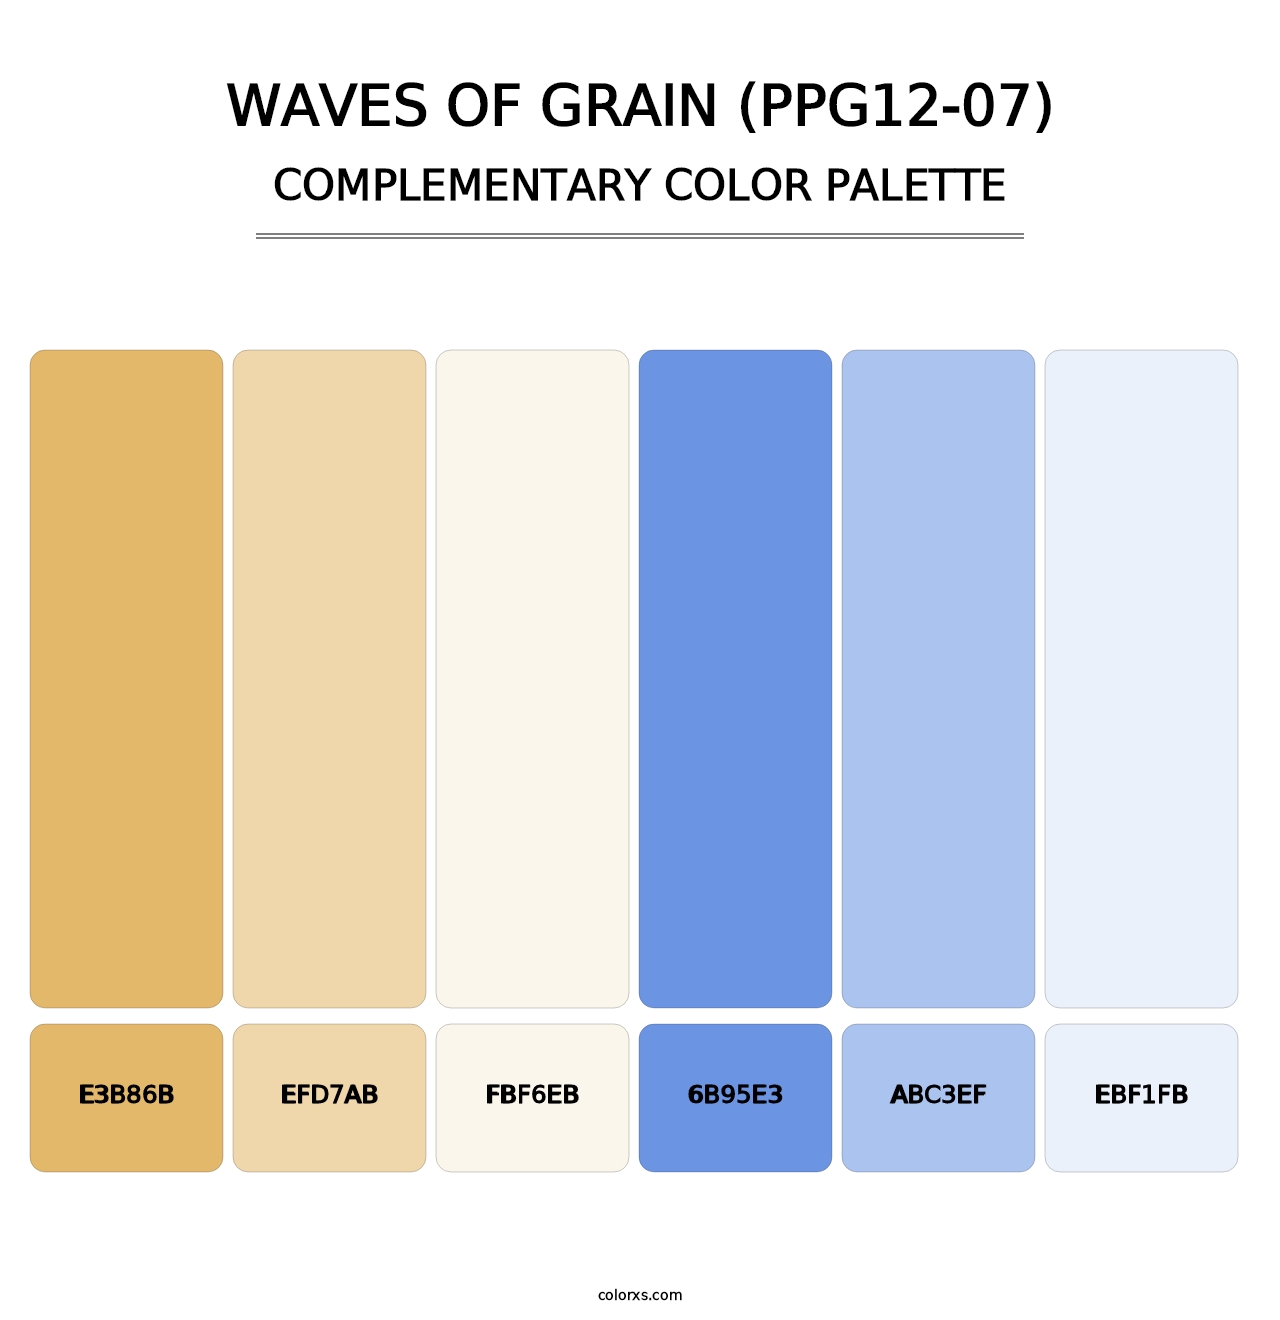 Waves Of Grain (PPG12-07) - Complementary Color Palette